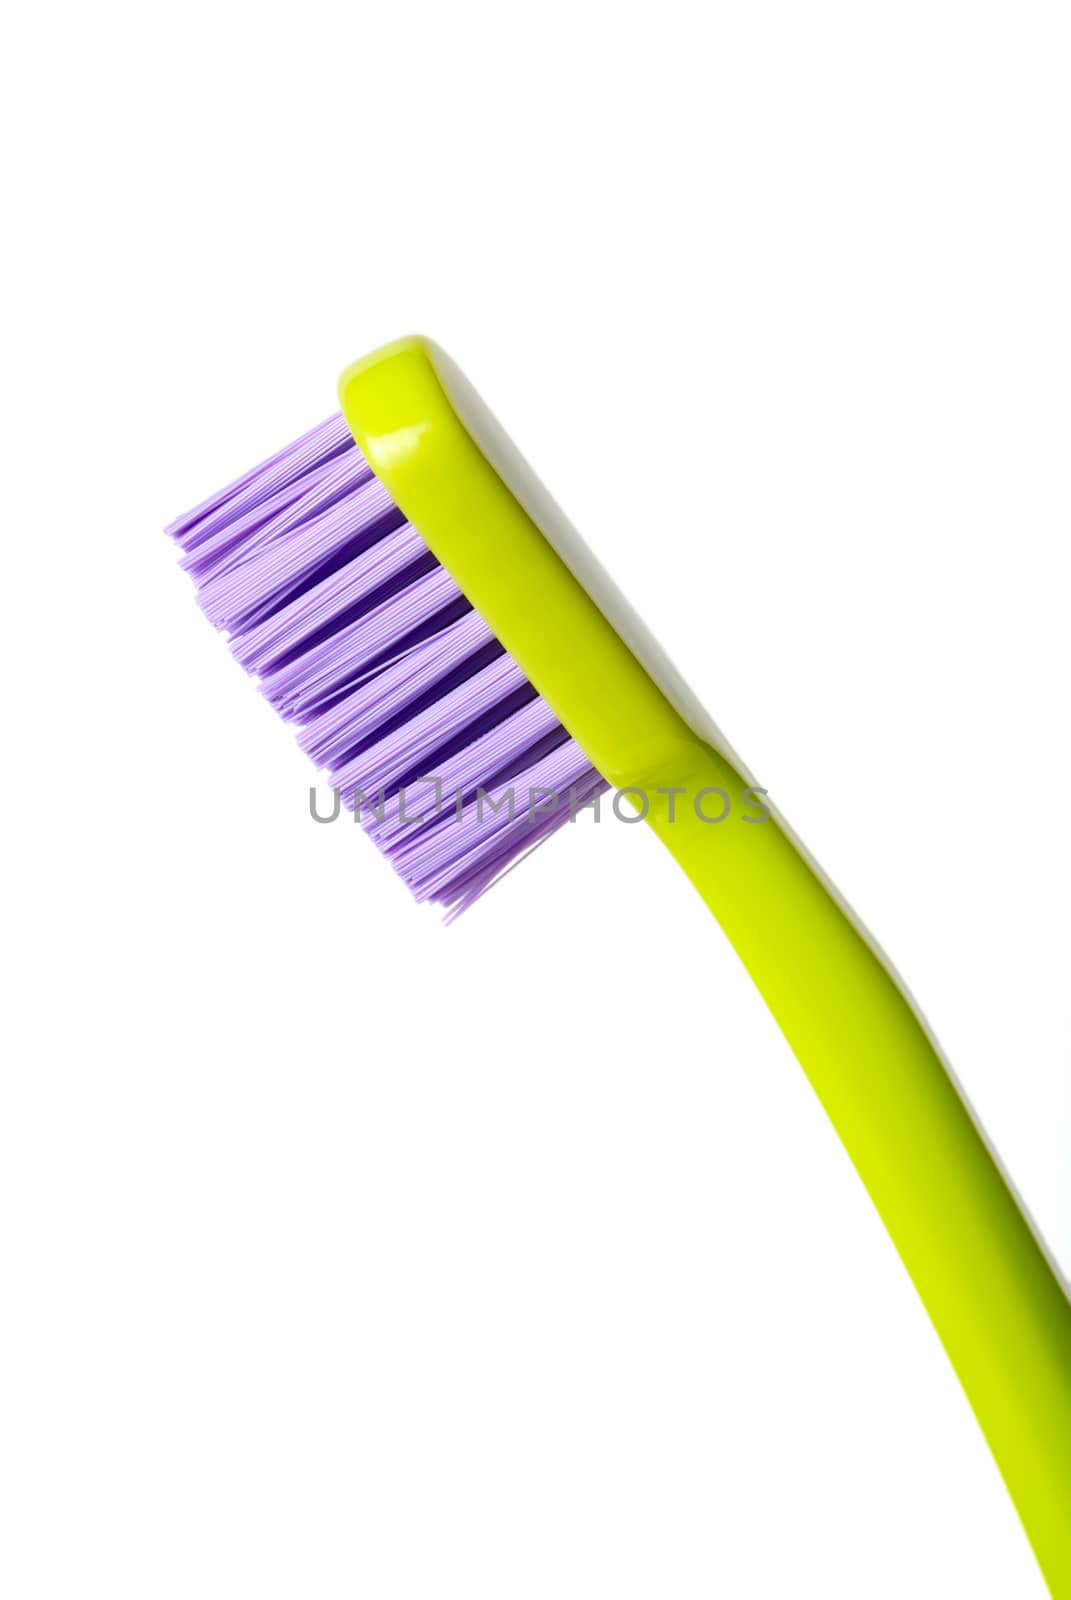 Colored toothbrush isolated on white background by Olinkau